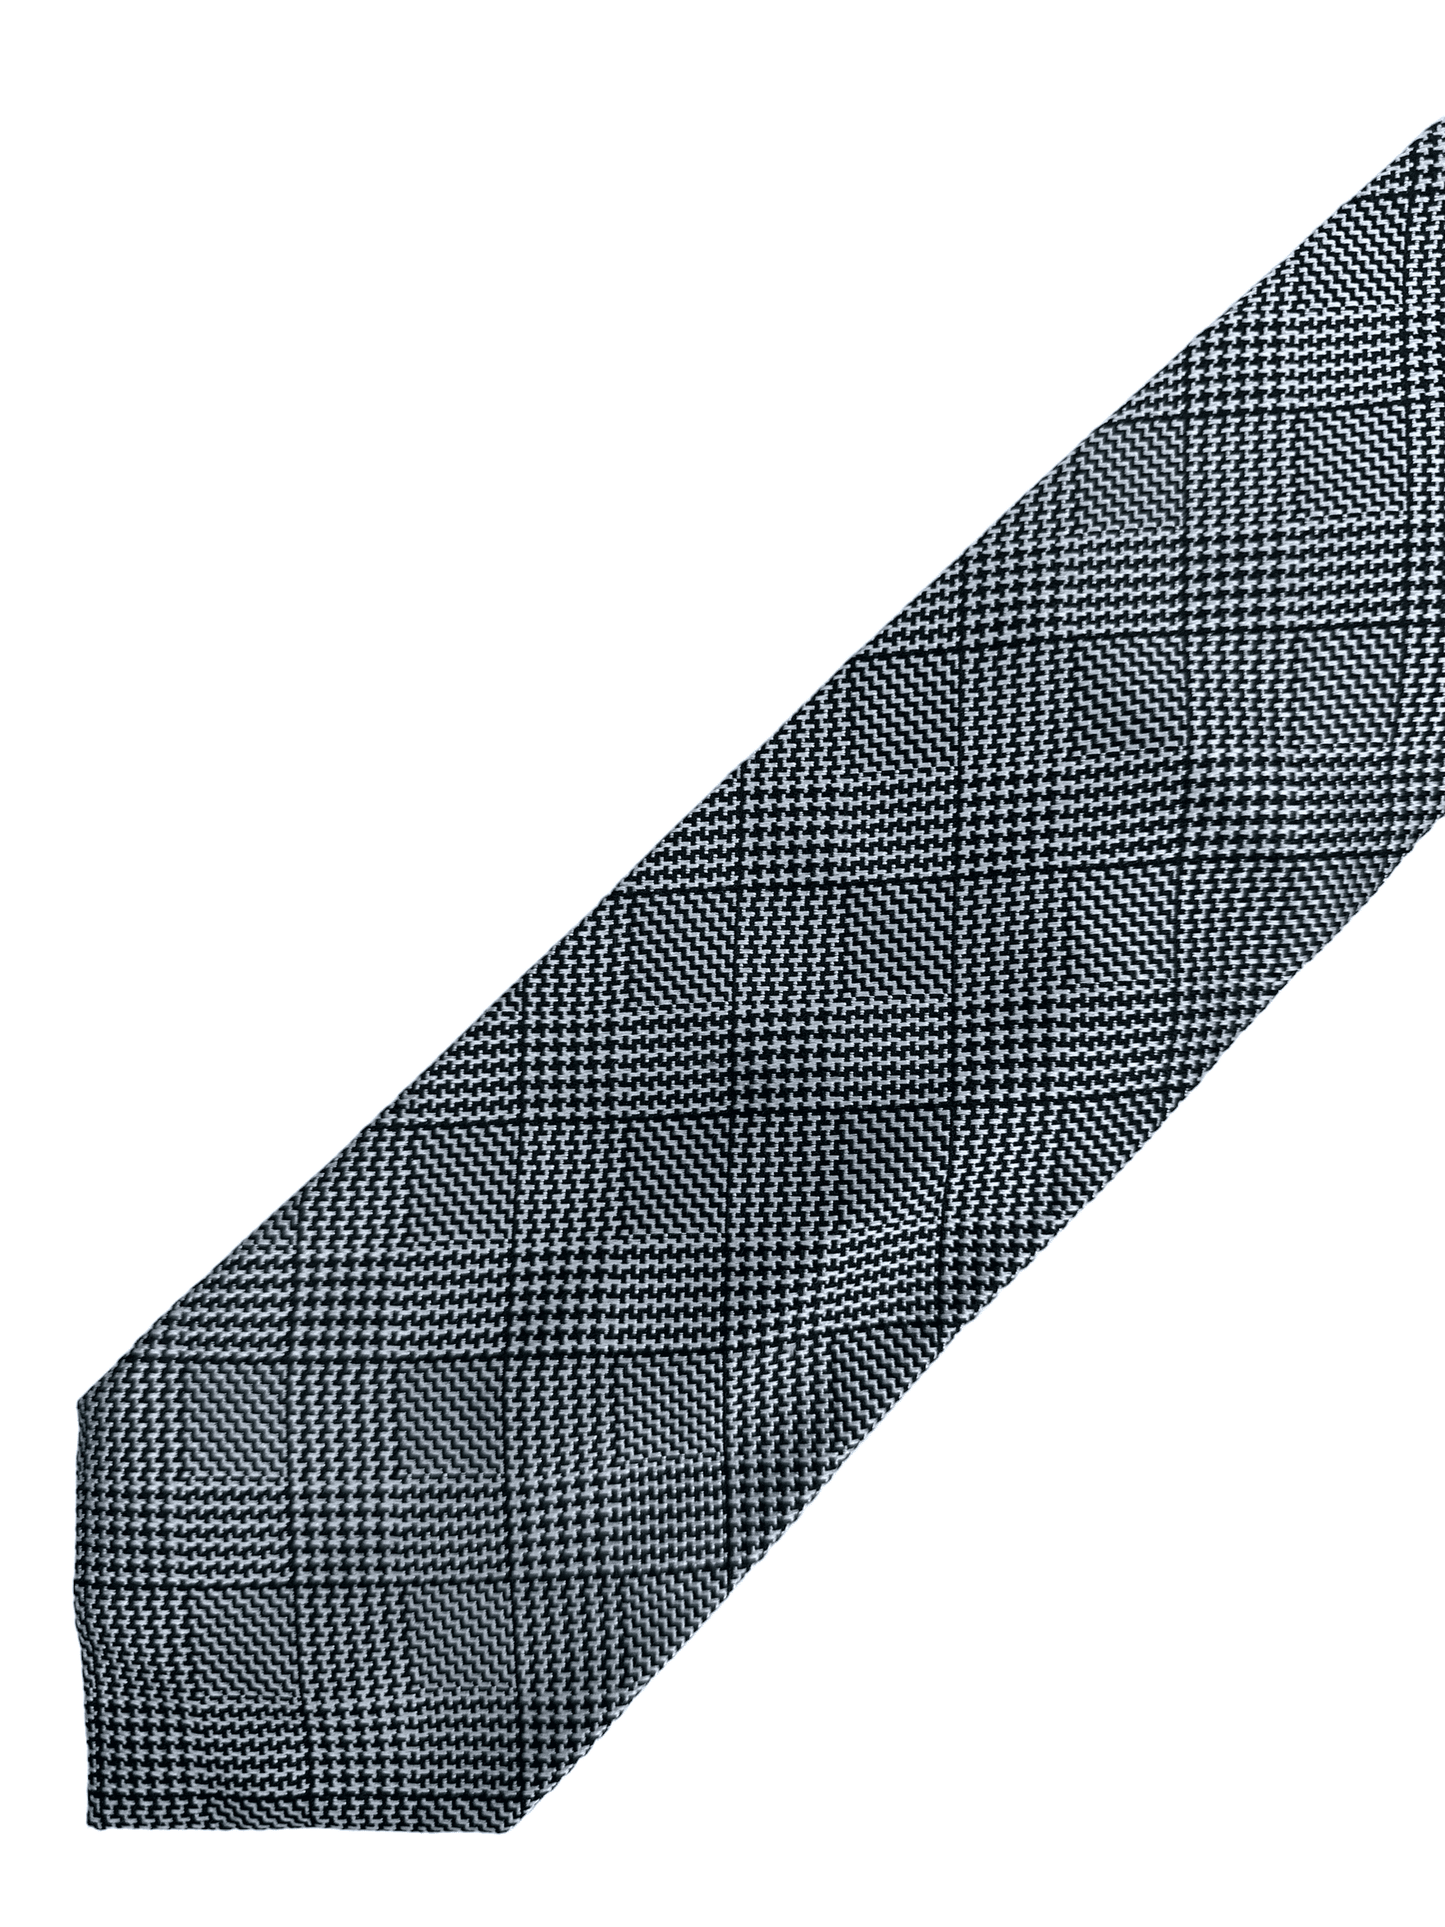 Tom Ford Black Houndstooth Silk Tie - Genuine Design luxury consignment Calgary, Alberta, Canada New & pre-owned clothing, shoes, accessories.